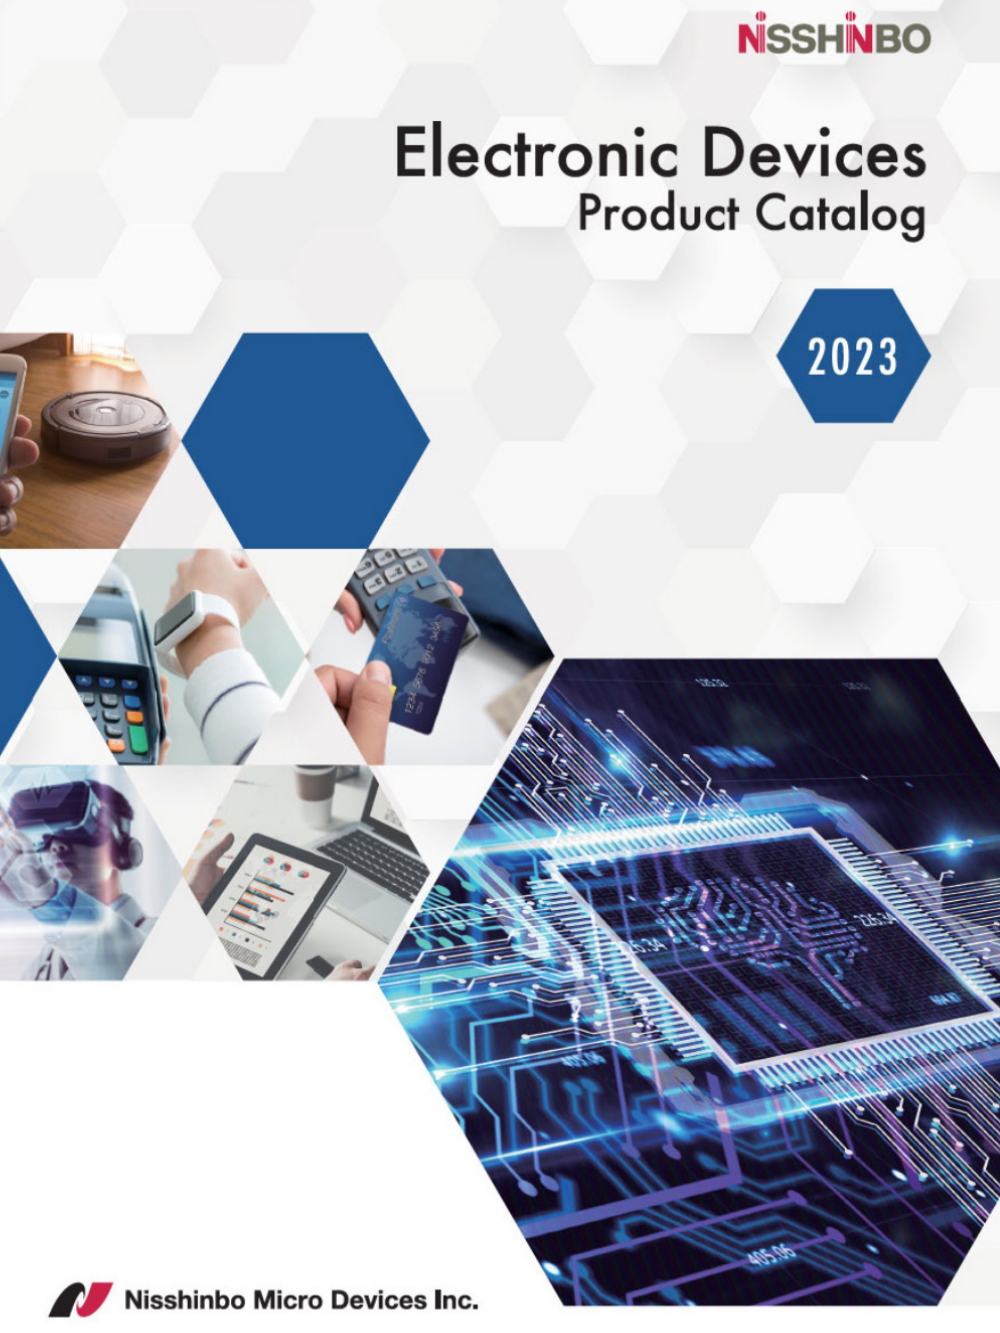 Electronic Devices Product Catalog 2023